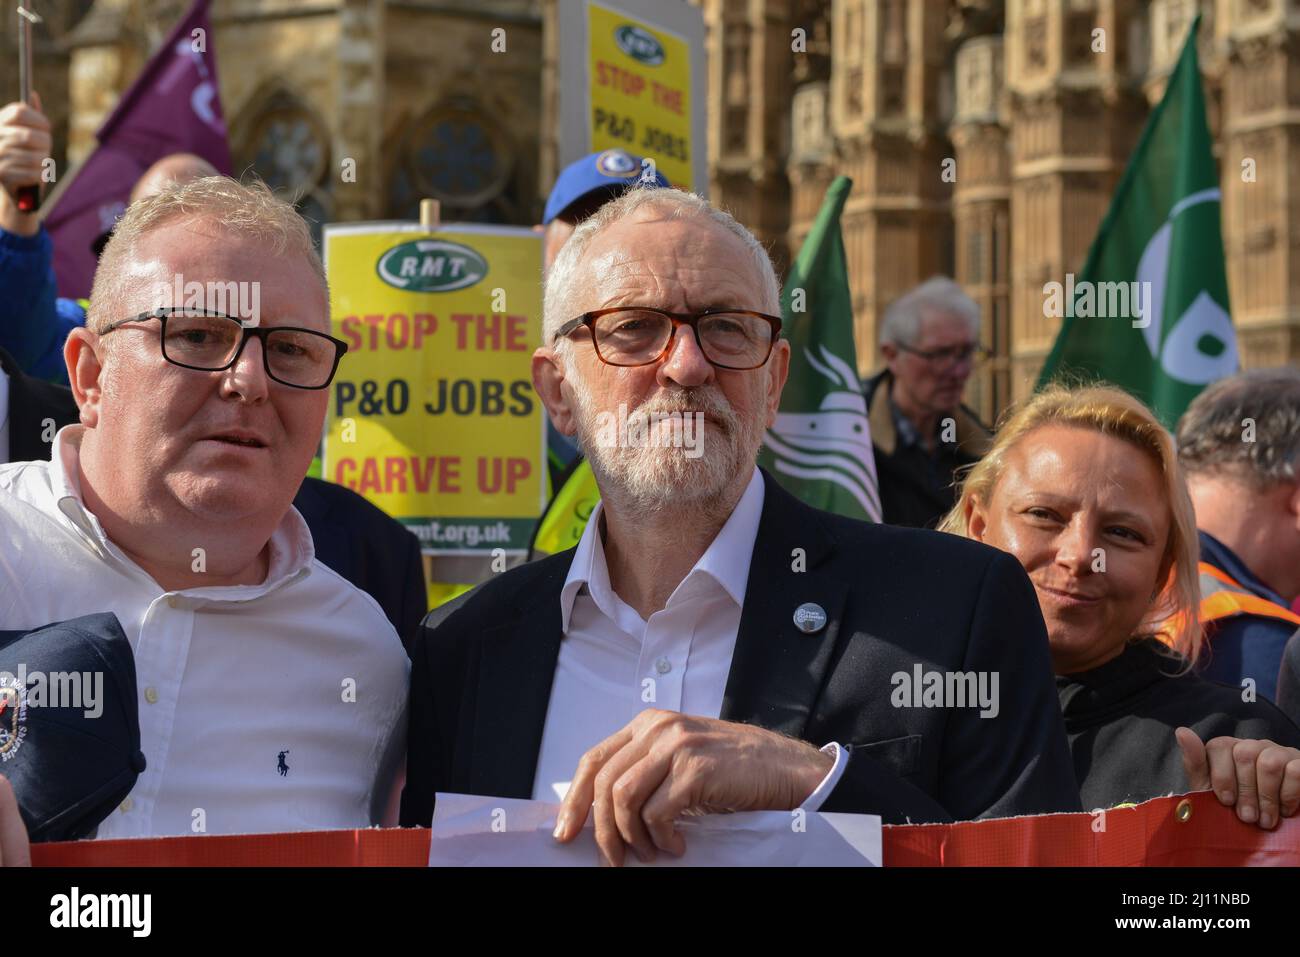 London, UK. 21st Mar, 2022. Jeremy Corbyn (m) is seen during the rally. RMT Union protest in solidarity to maritime ferry workers and against the P&O job cuts. Protesters gathered outside the offices of DP World on palace Street, and marched to Old Palace yard outside the Parliament. Credit: SOPA Images Limited/Alamy Live News Stock Photo